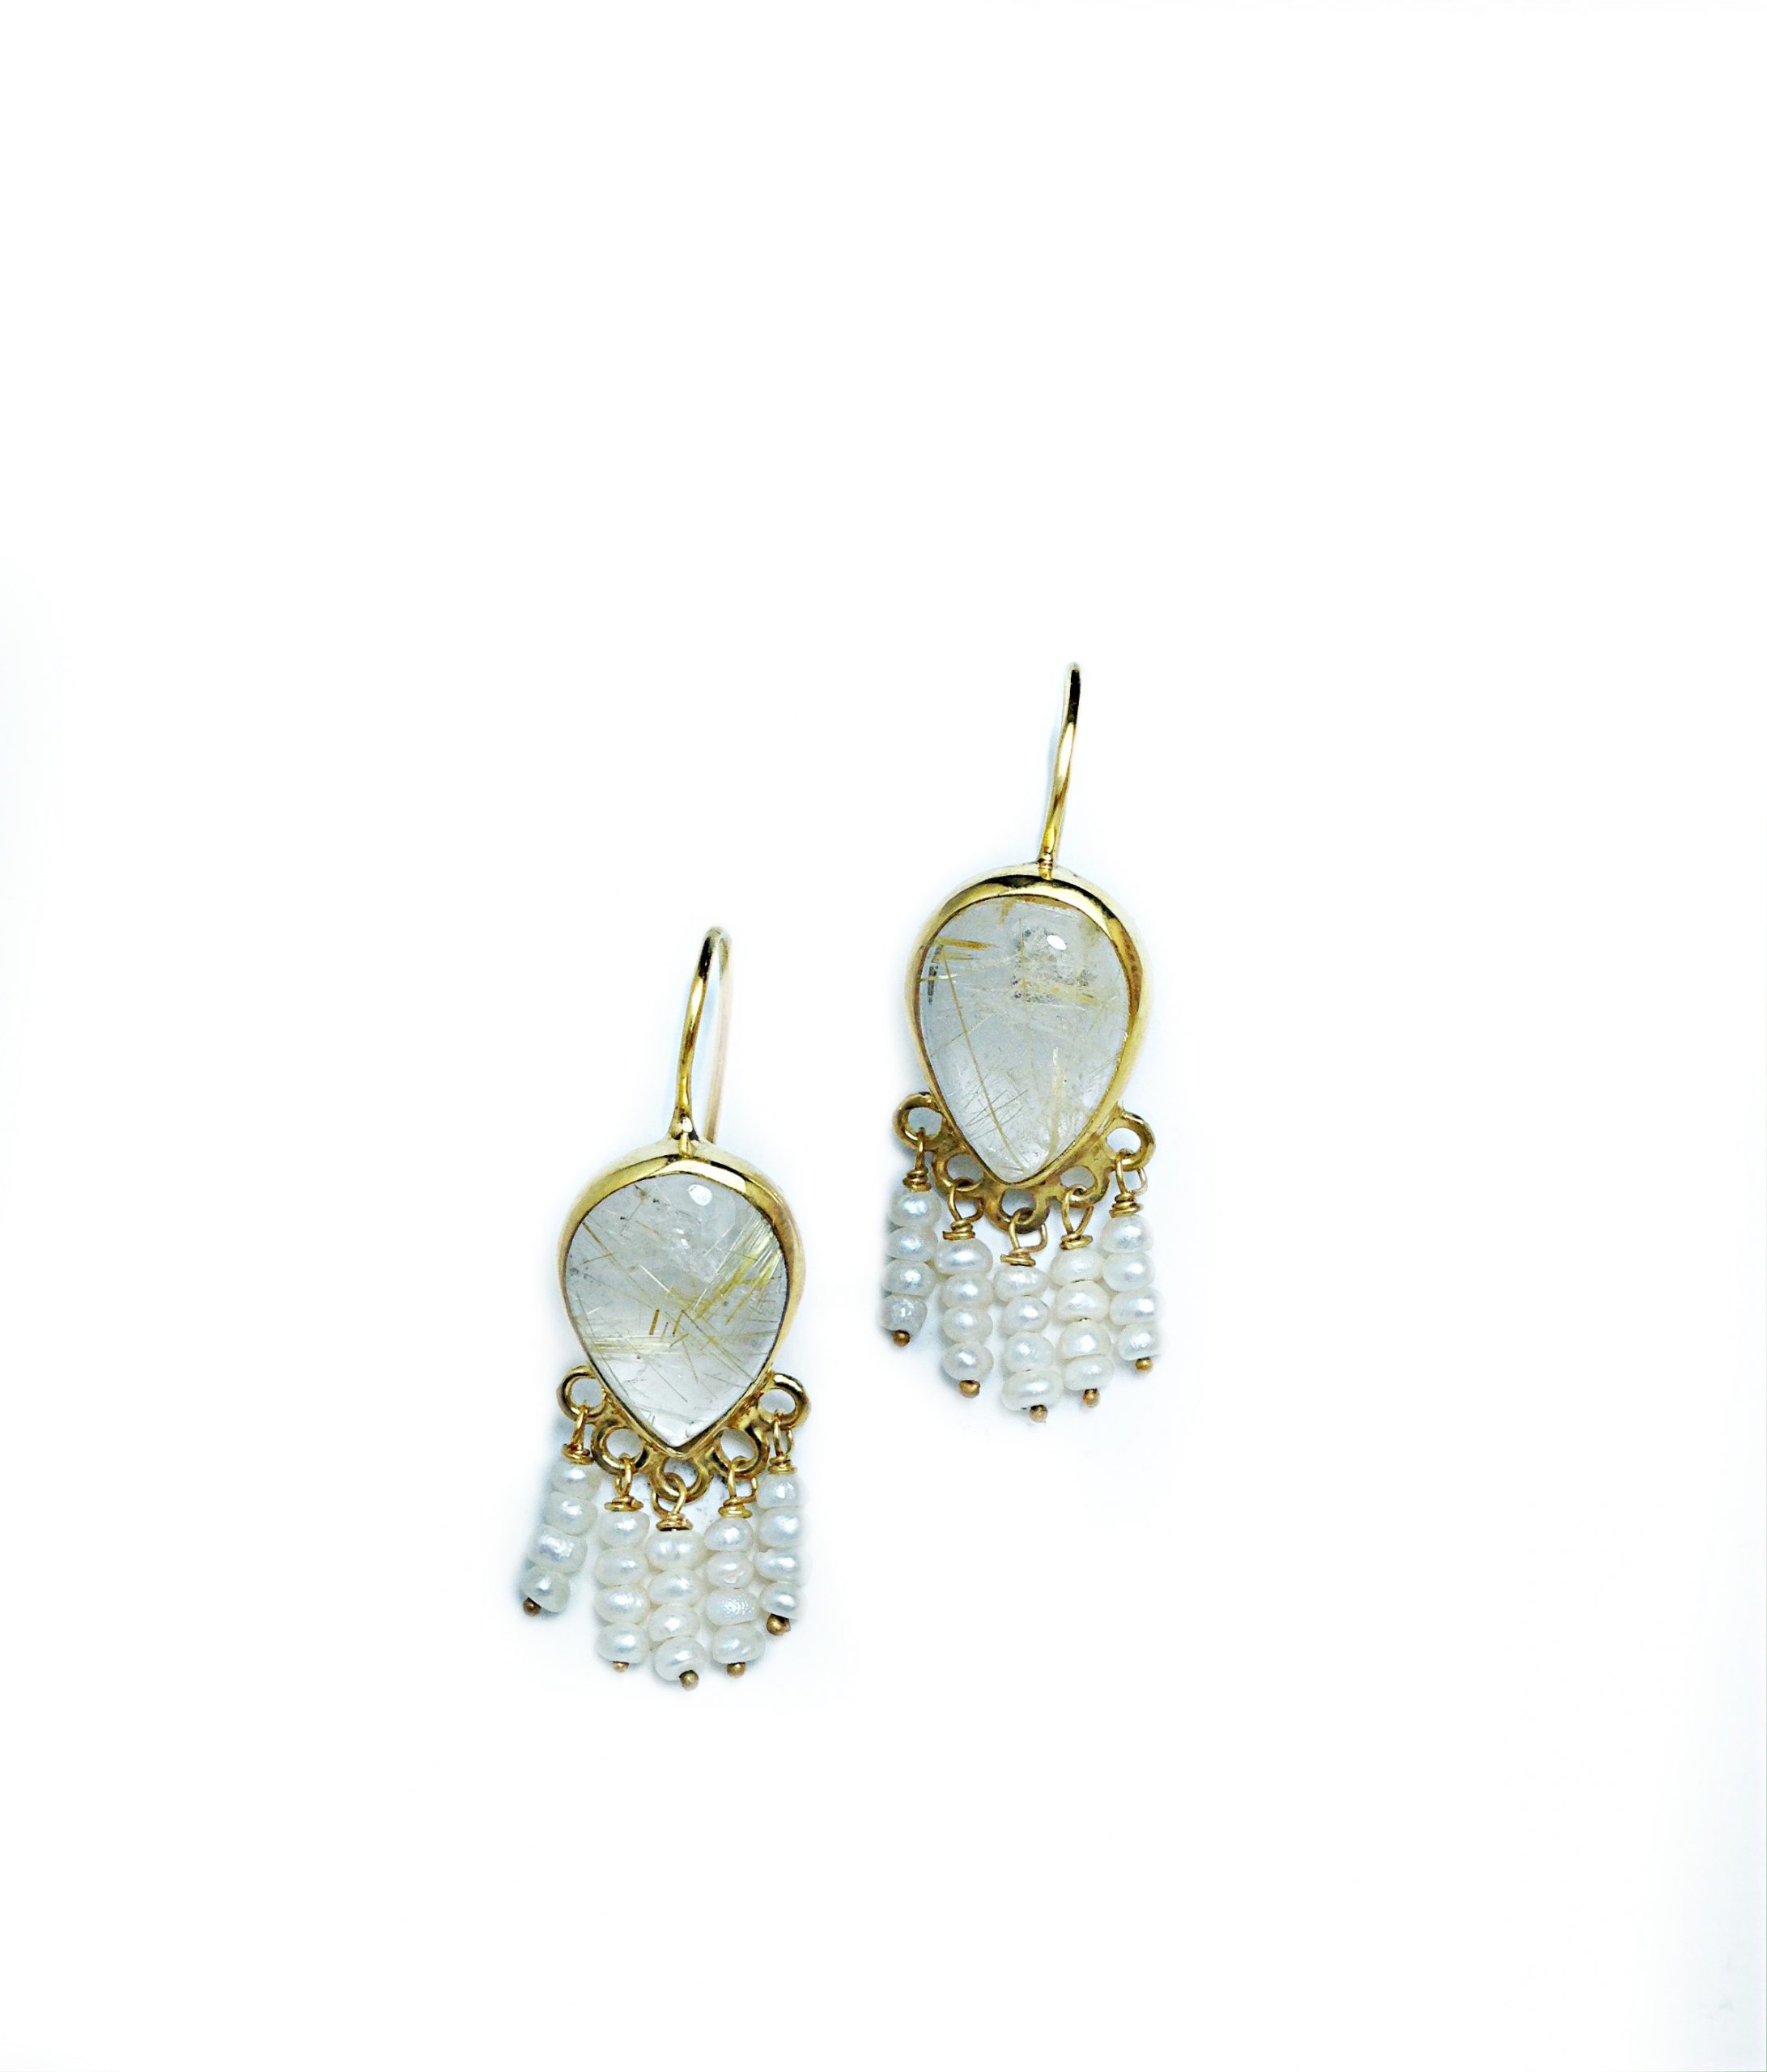 Handmade drop earrings with Rutile and pearls by Tonia Makri